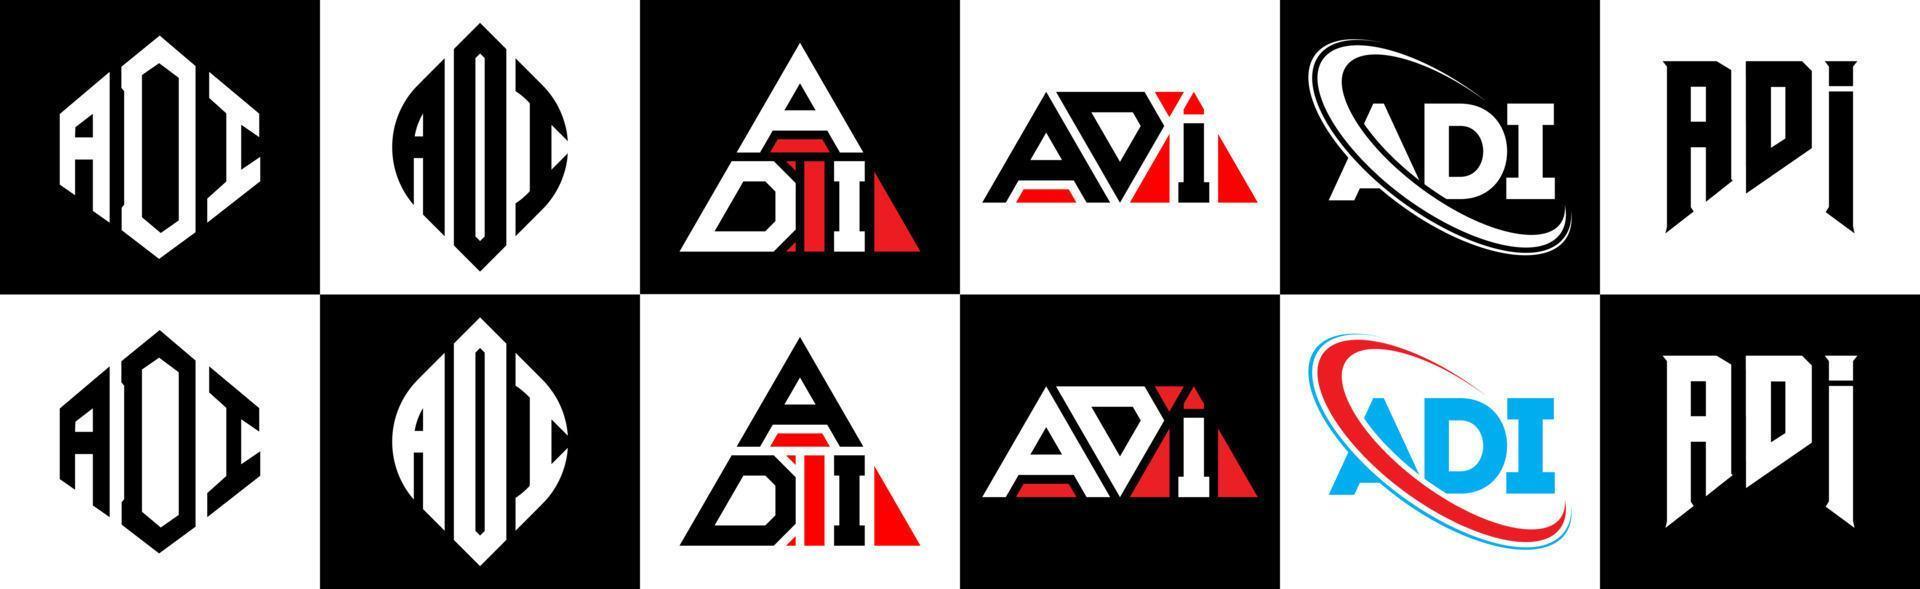 ADI letter logo design in six style. ADI polygon, circle, triangle, hexagon, flat and simple style with black and white color variation letter logo set in one artboard. ADI minimalist and classic logo vector